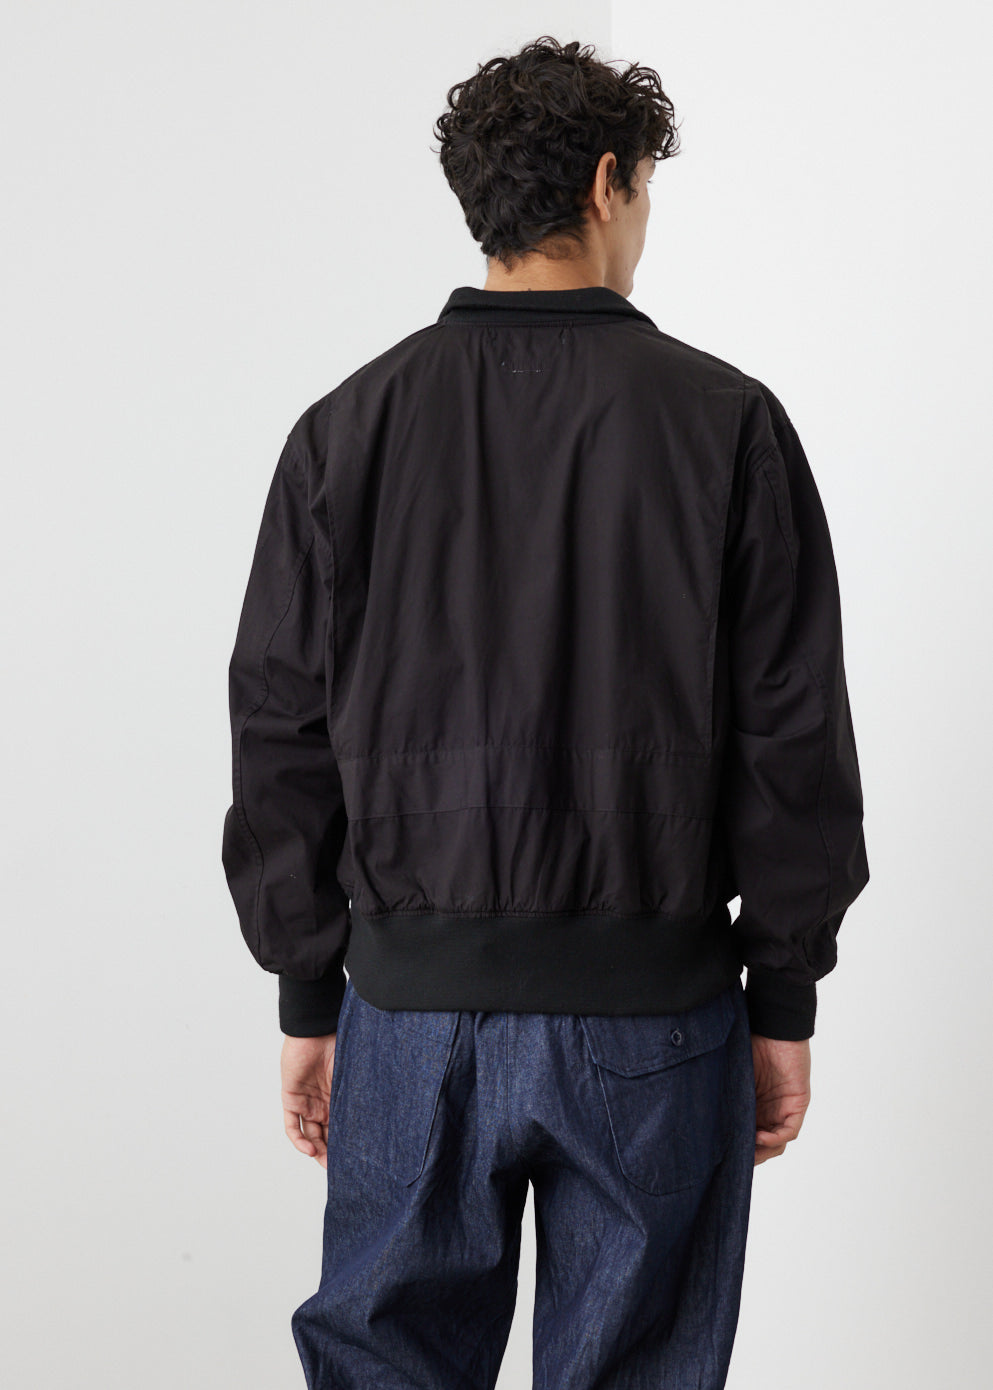 Engineered Garments 22ss A-1 JACKET M画像追加いたしました